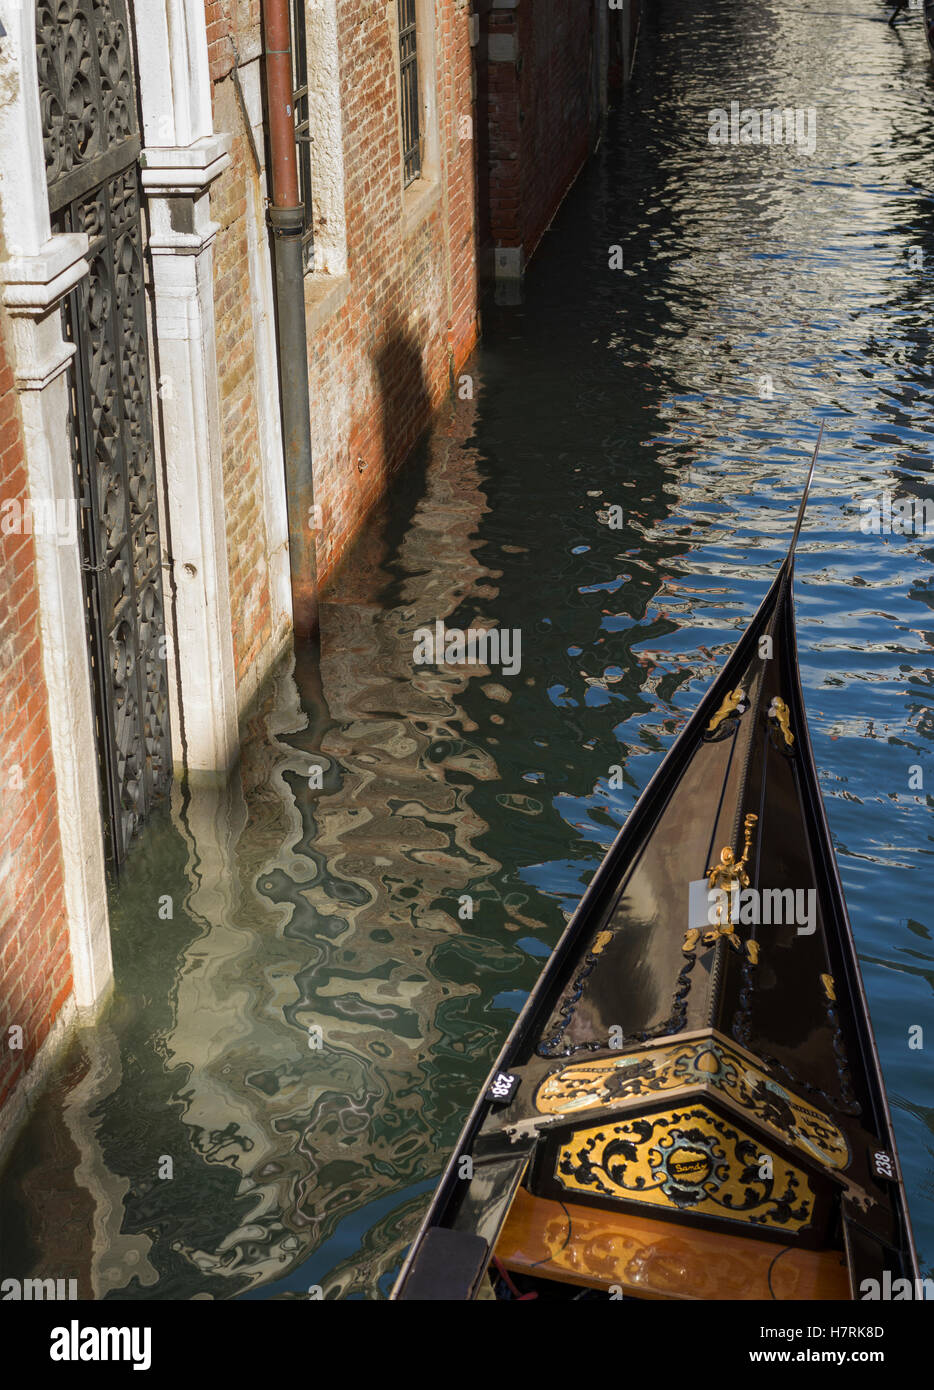 Bow of a gondola in a canal beside a brick wall; Venice, Italy Stock Photo